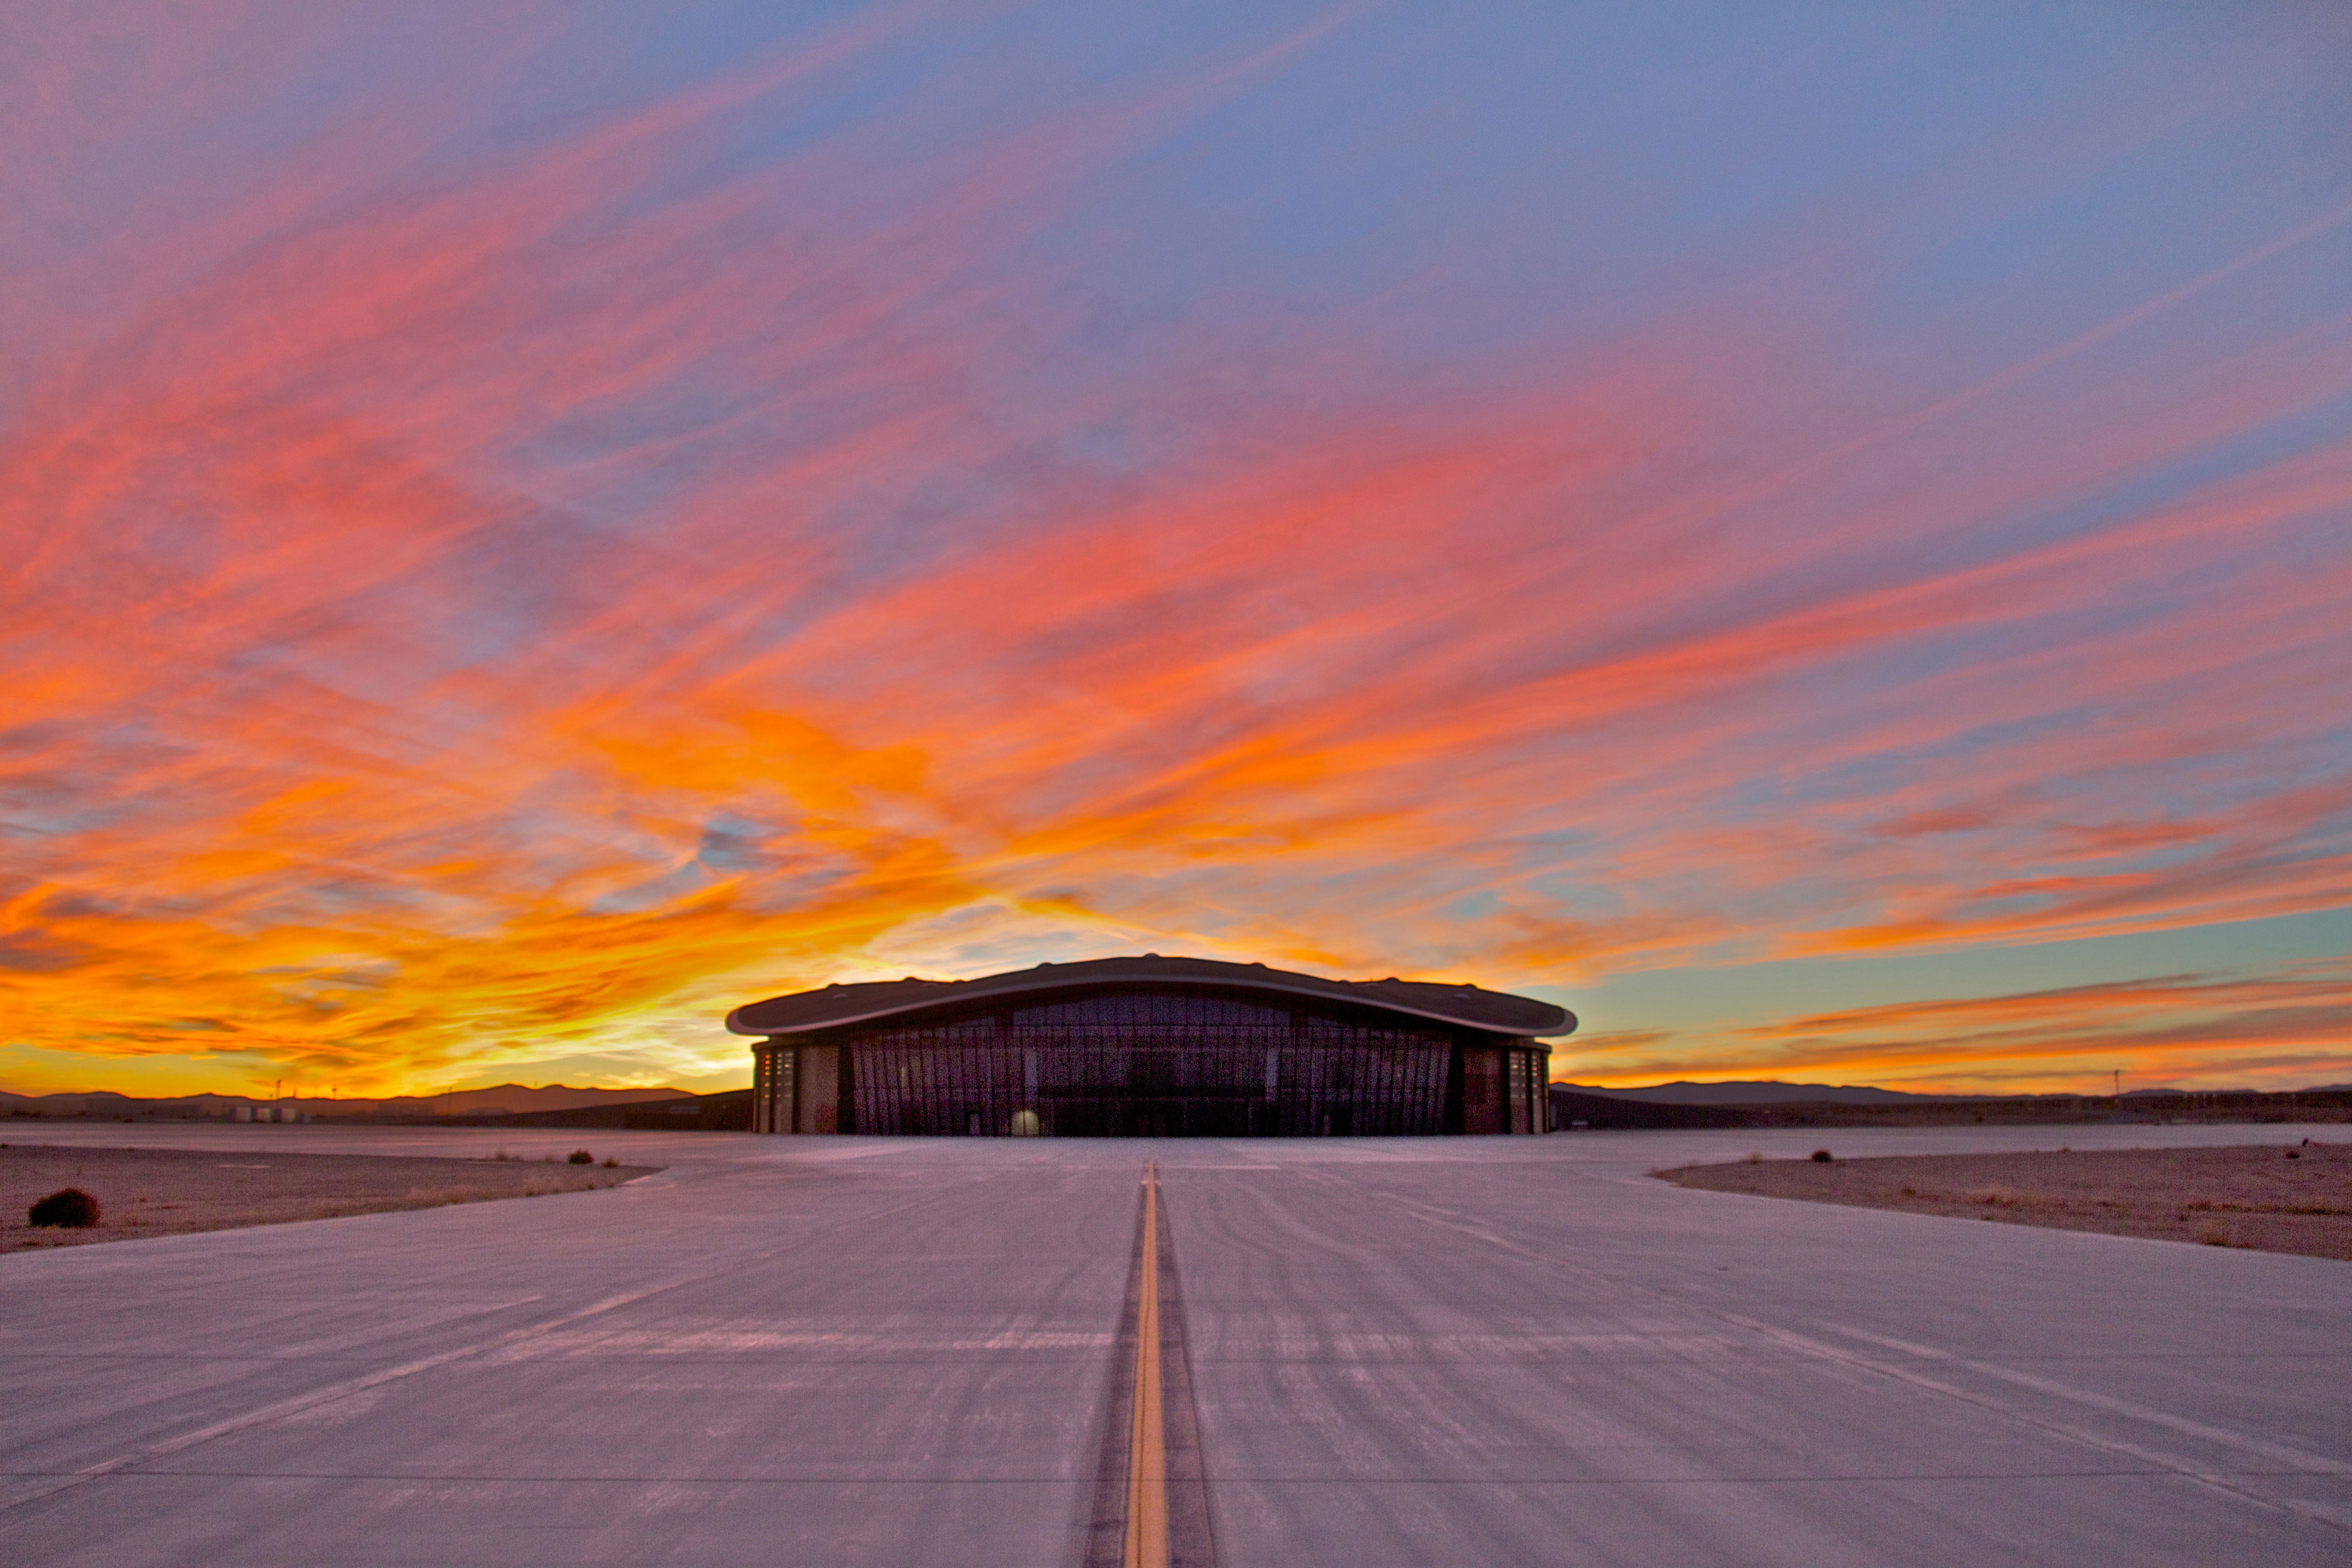 A spectacular New Mexico sunset as backdrop to the Virgin Galactic Gateway to Space terminal. Credit: Spaceport America.